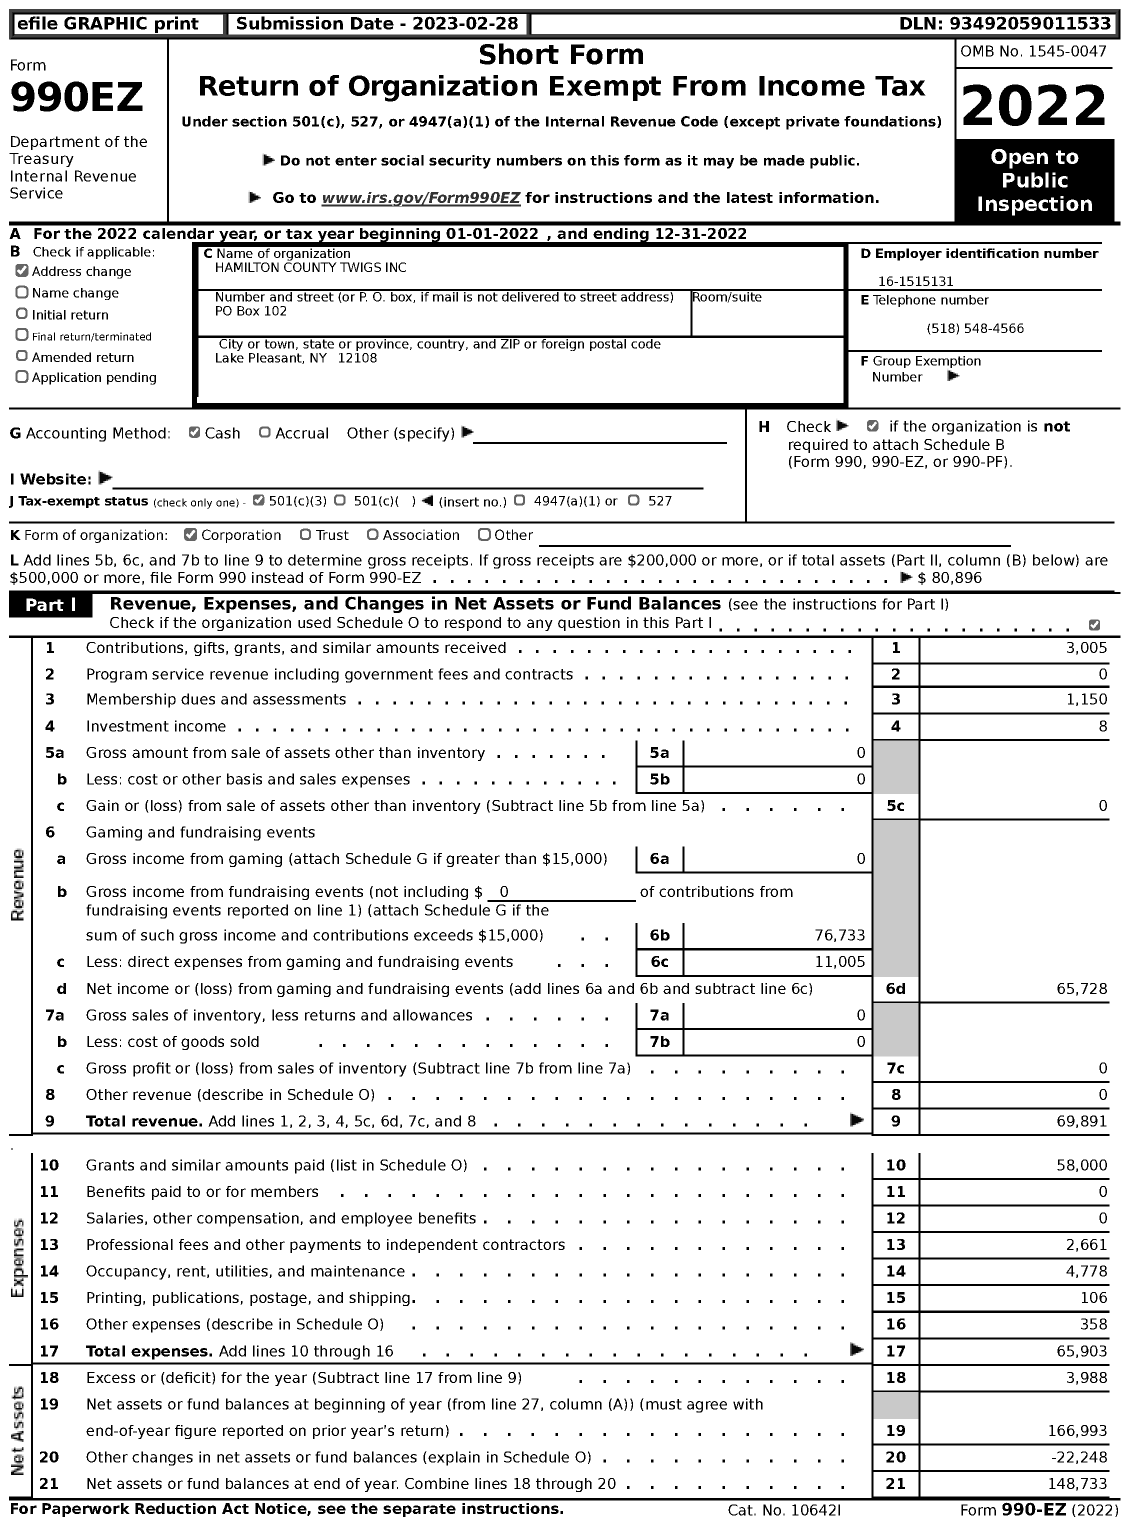 Image of first page of 2022 Form 990EZ for Hamilton County Twigs